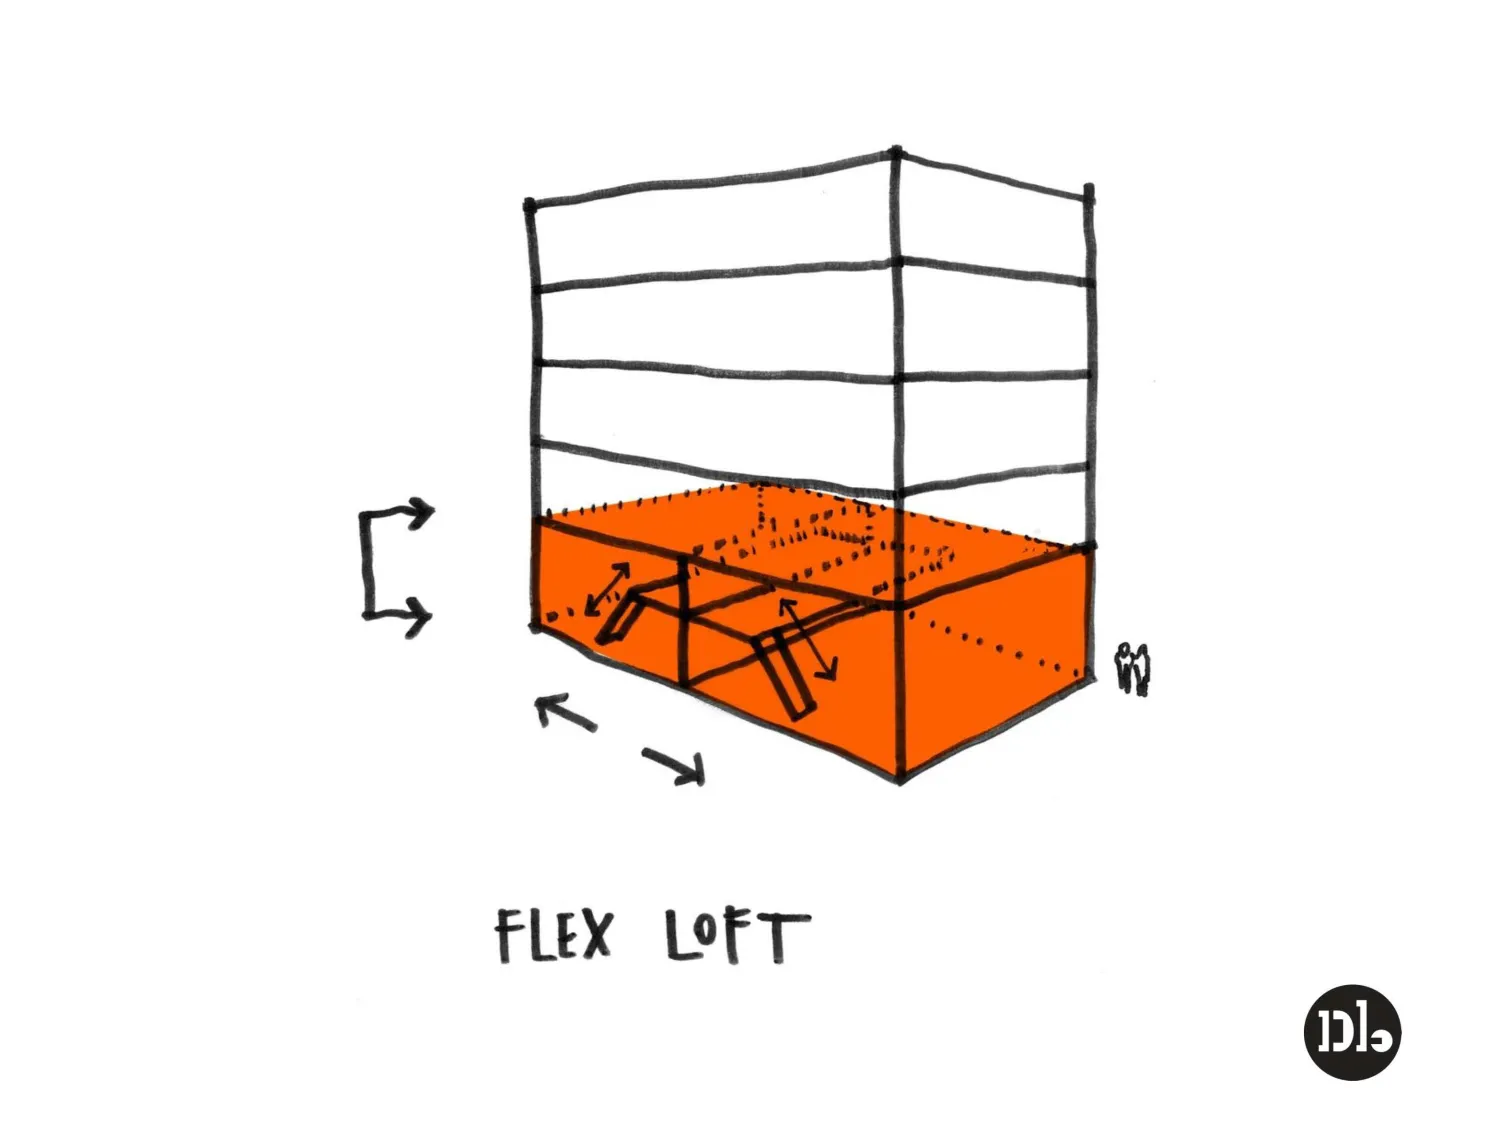 Sketch showing an example of flex lofts on the ground floor for Pier 70 in San Francisco.